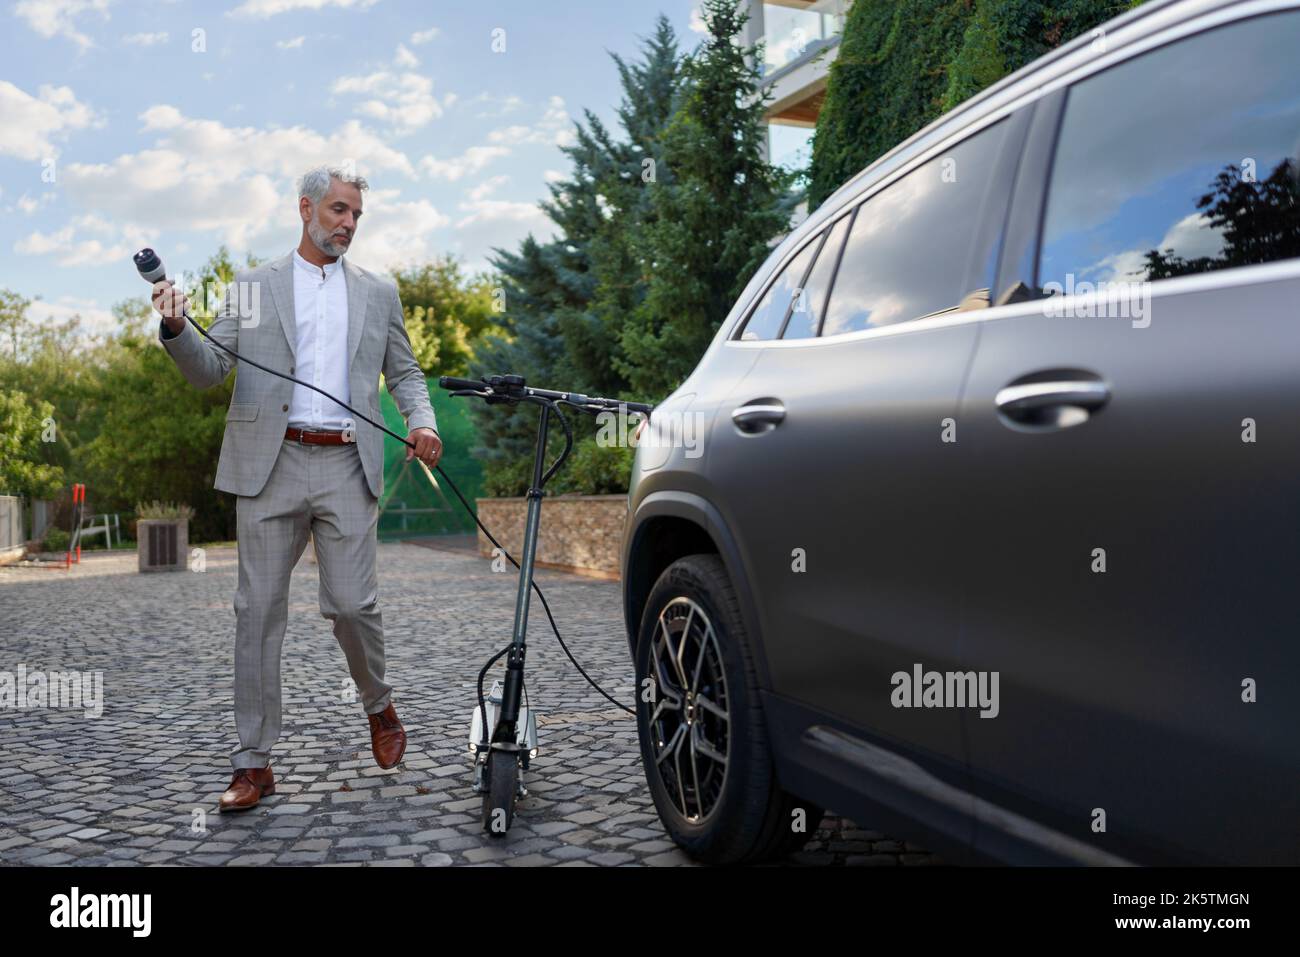 Businessman in suit on way to work with eletric scooter and charging his electric car. Concept of eco commuting and green transportation. Stock Photo